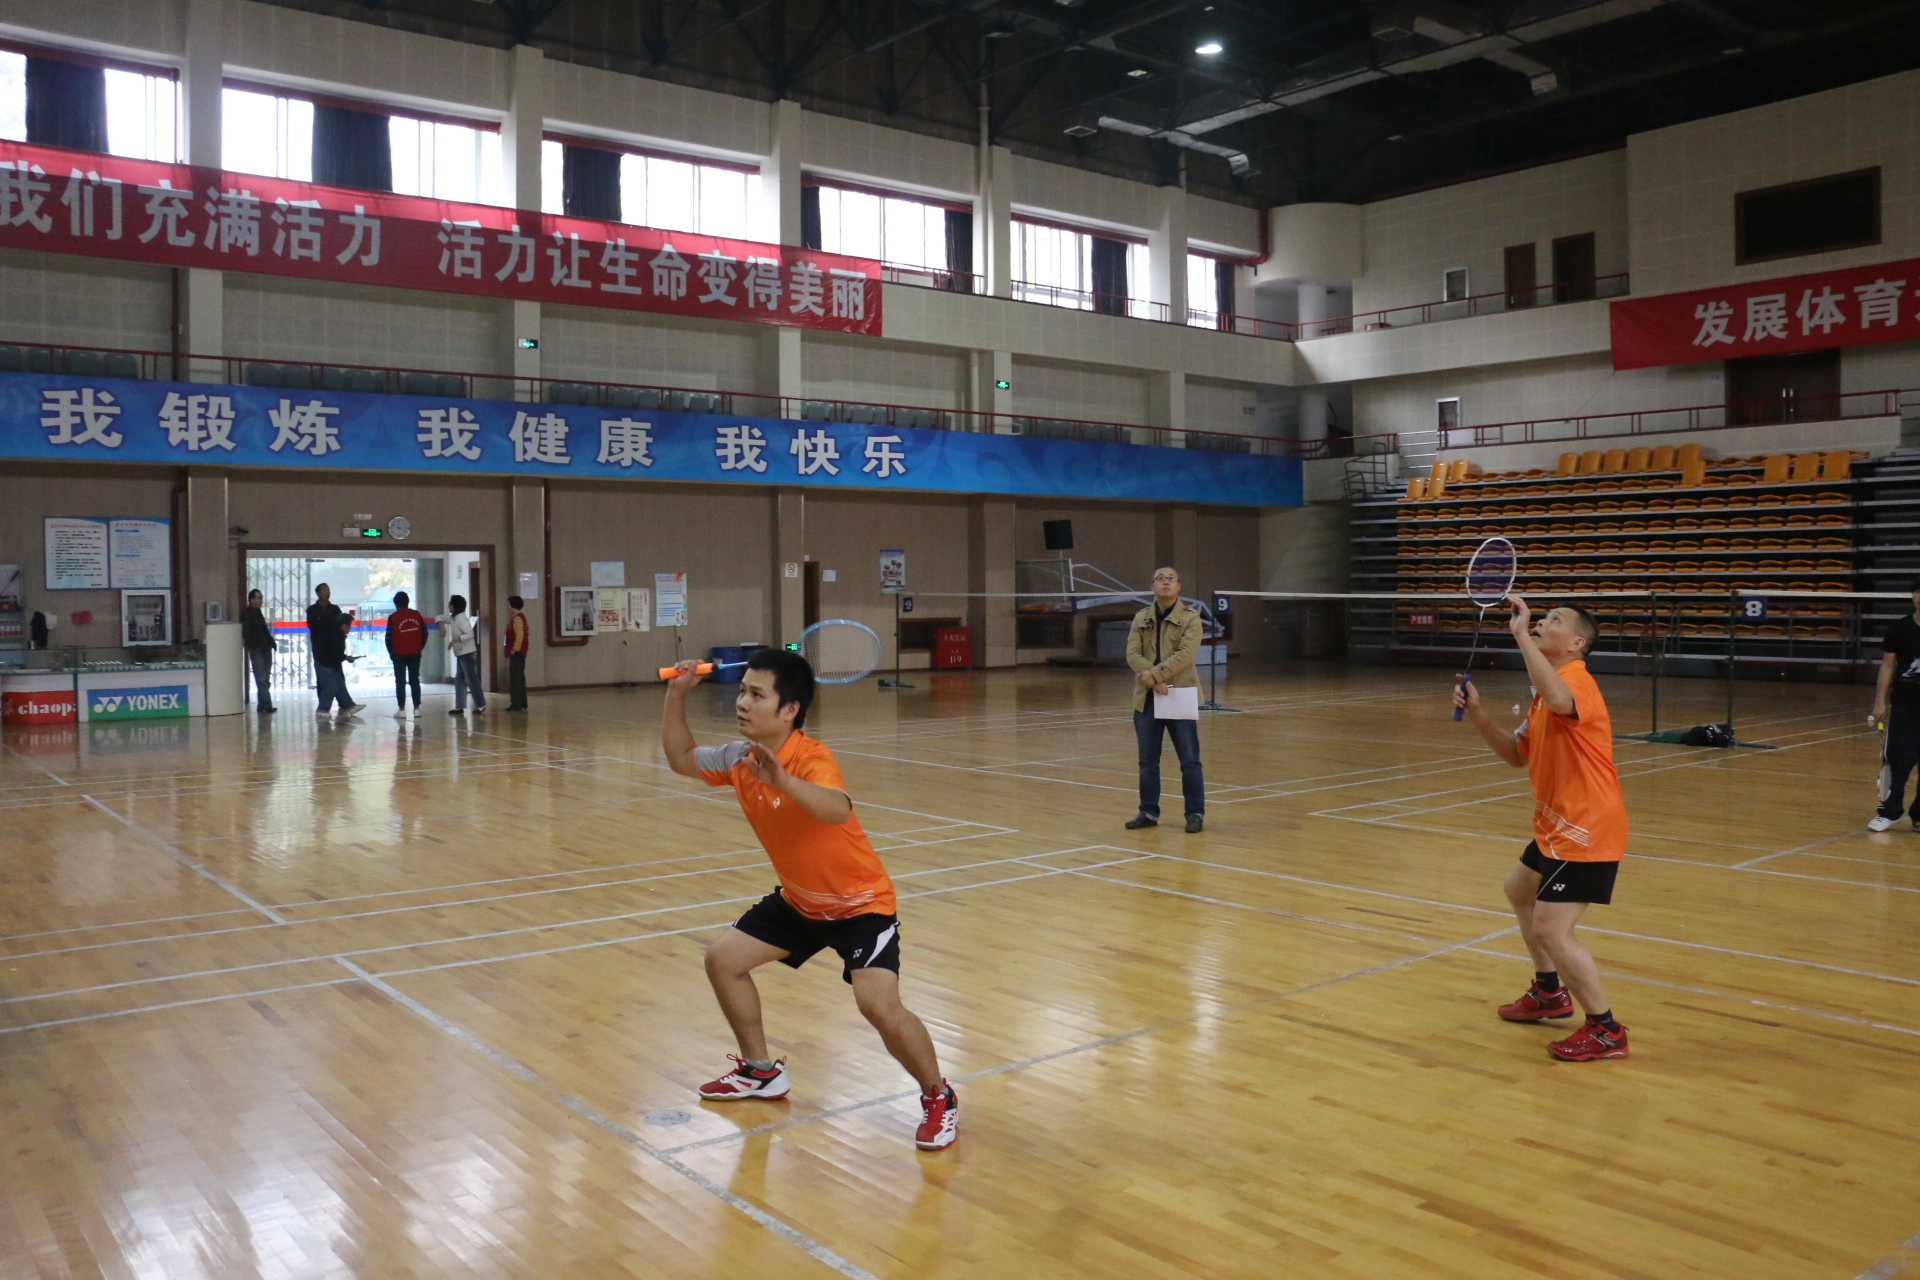 The Eighth "Huabao Cup" Badminton